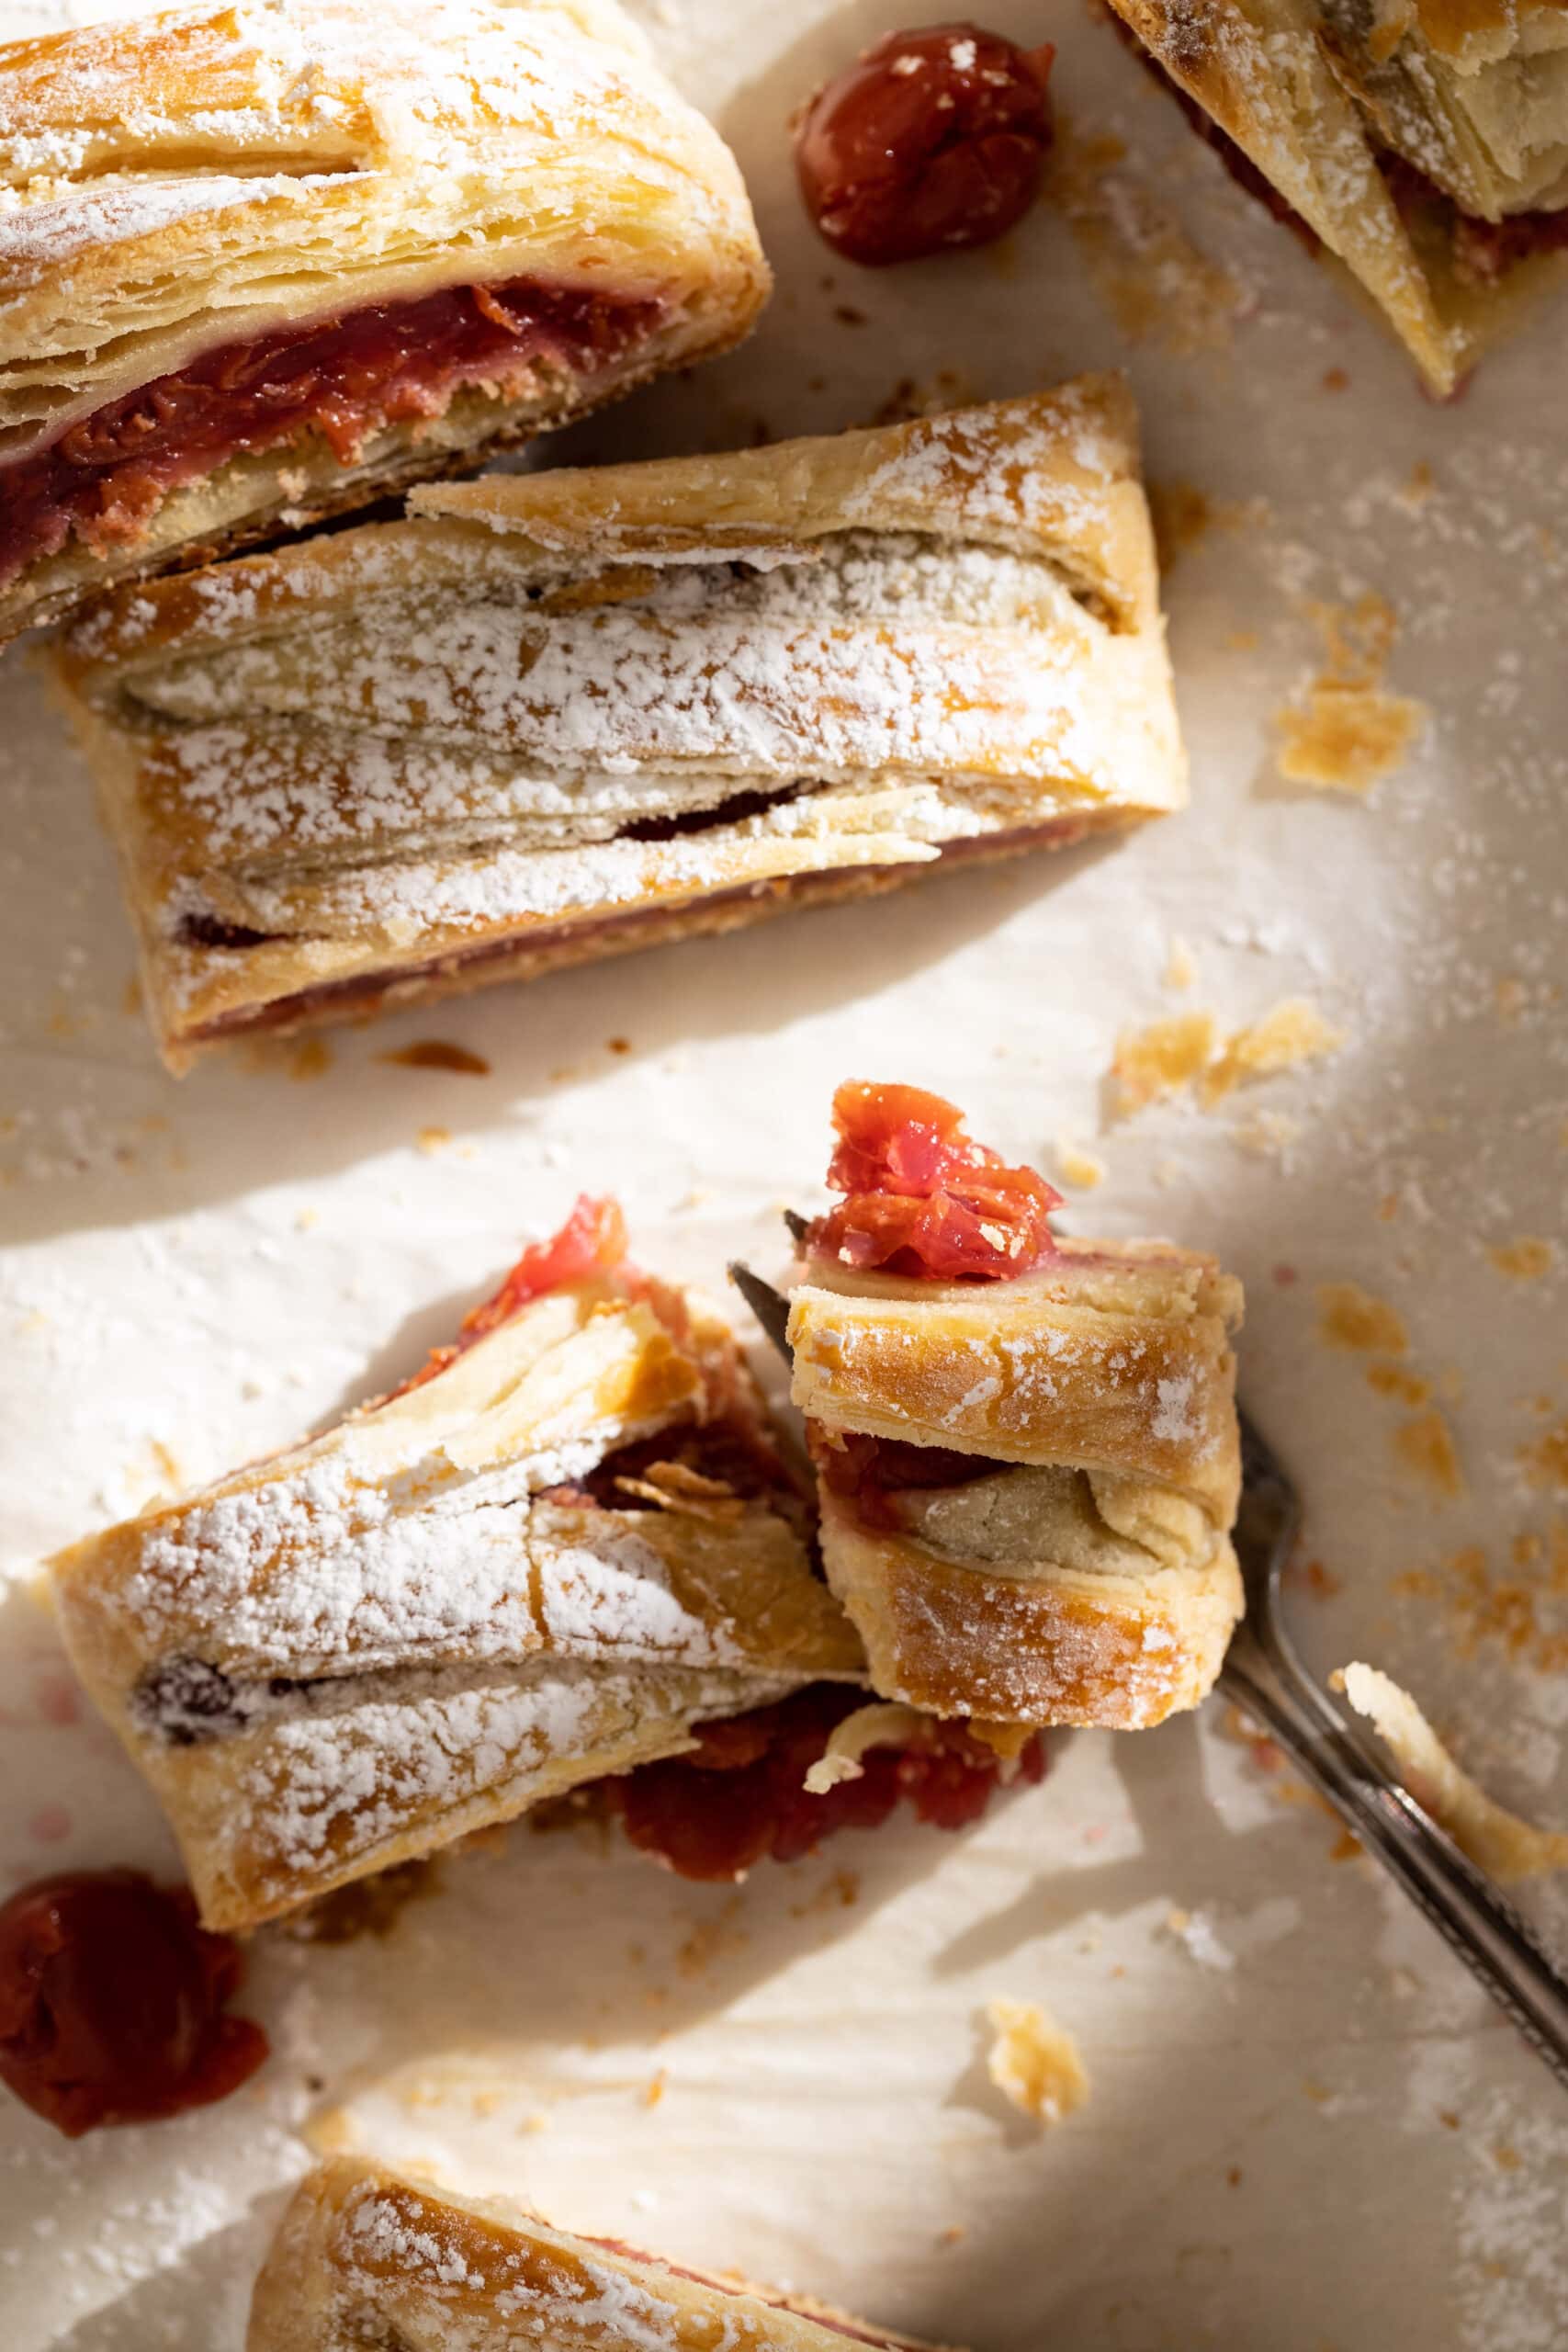 Overhead view of multiple slices of cherry strudel on parchment paper.